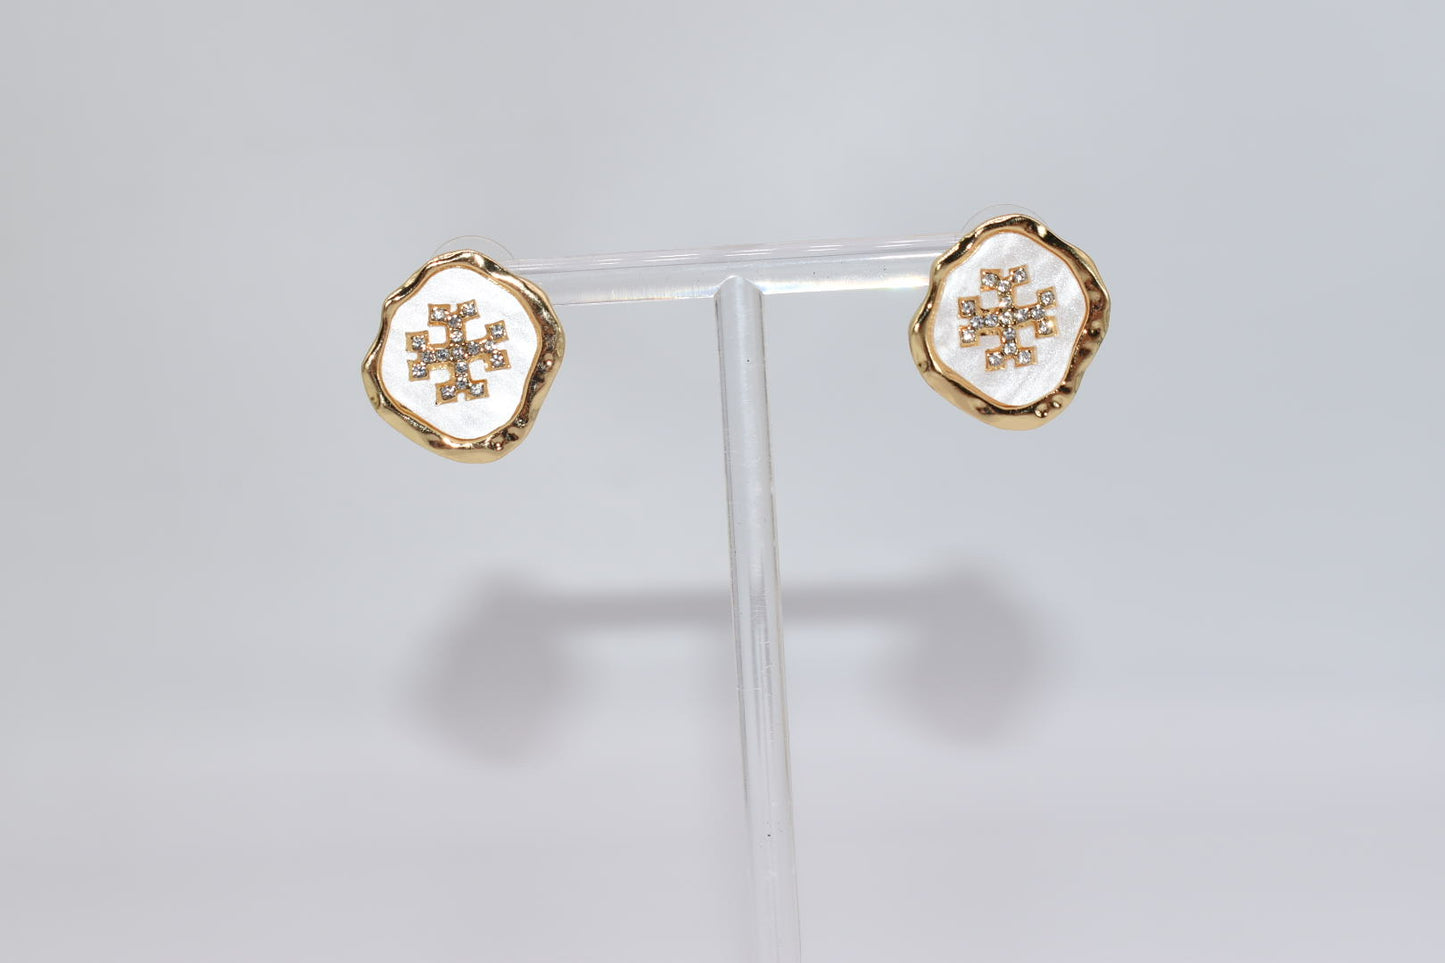 Statement Earrings: Simply Sophisticated White & Gold Stud Earrings